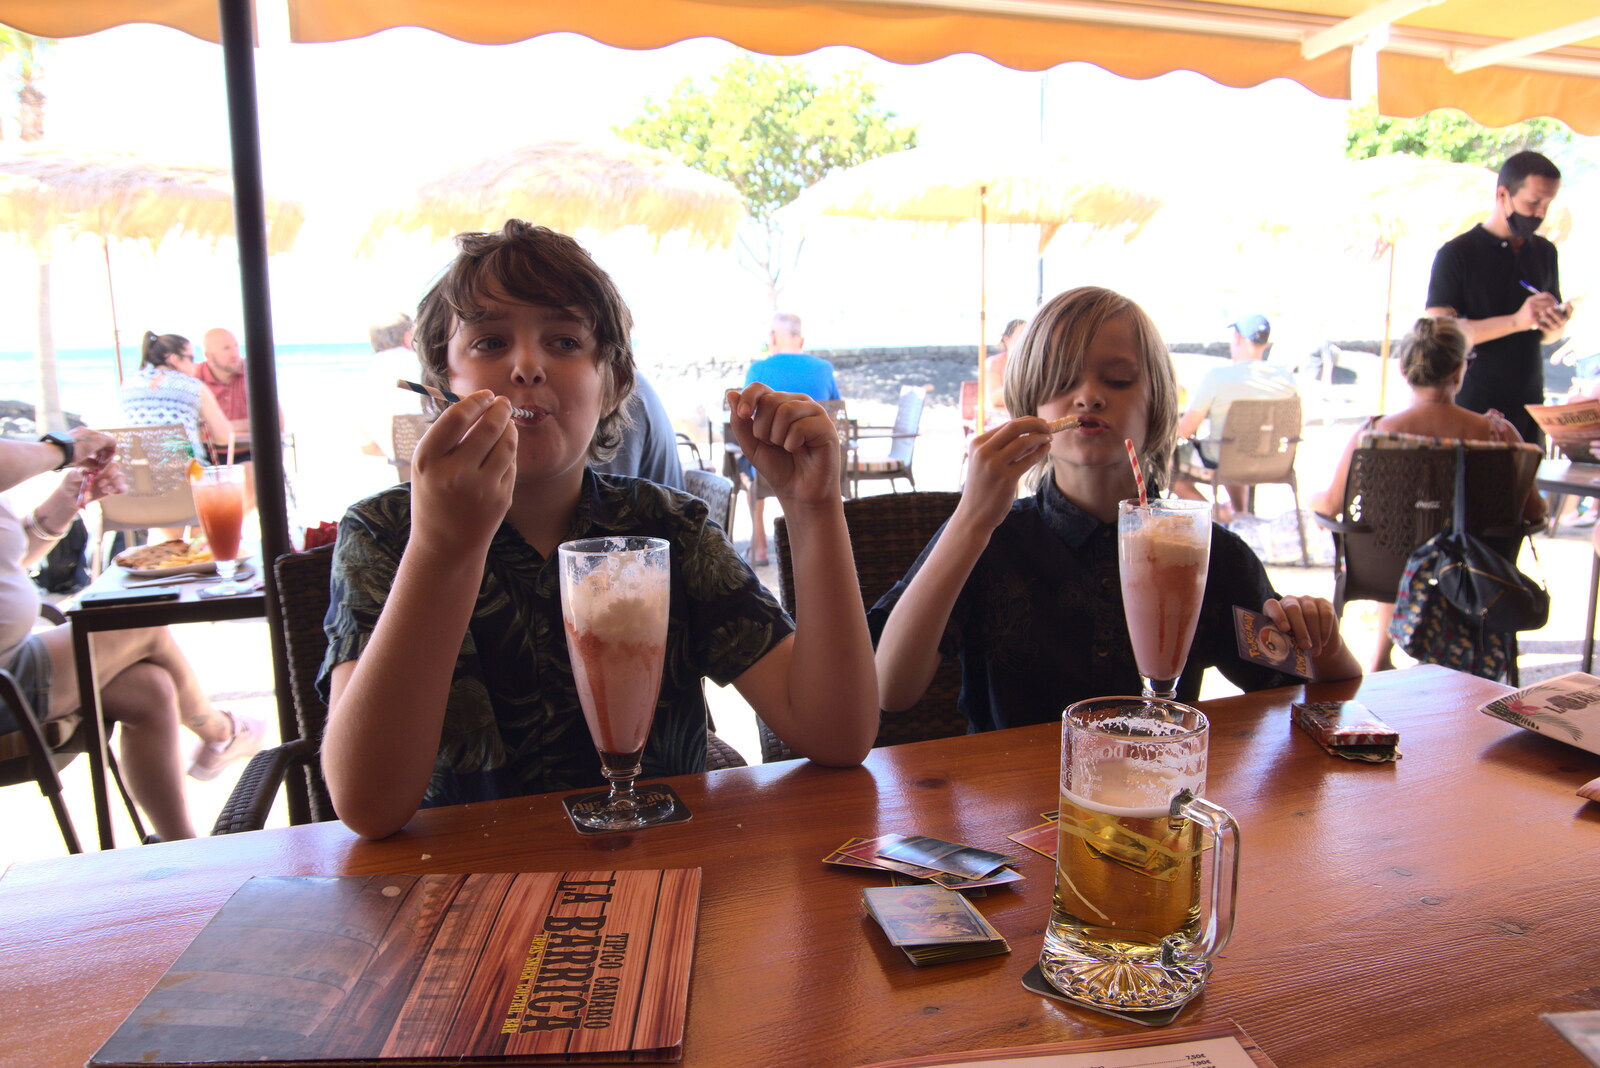 The boys get strawberry milkshakes from Five Days in Lanzarote, Canary Islands, Spain - 24th October 2021